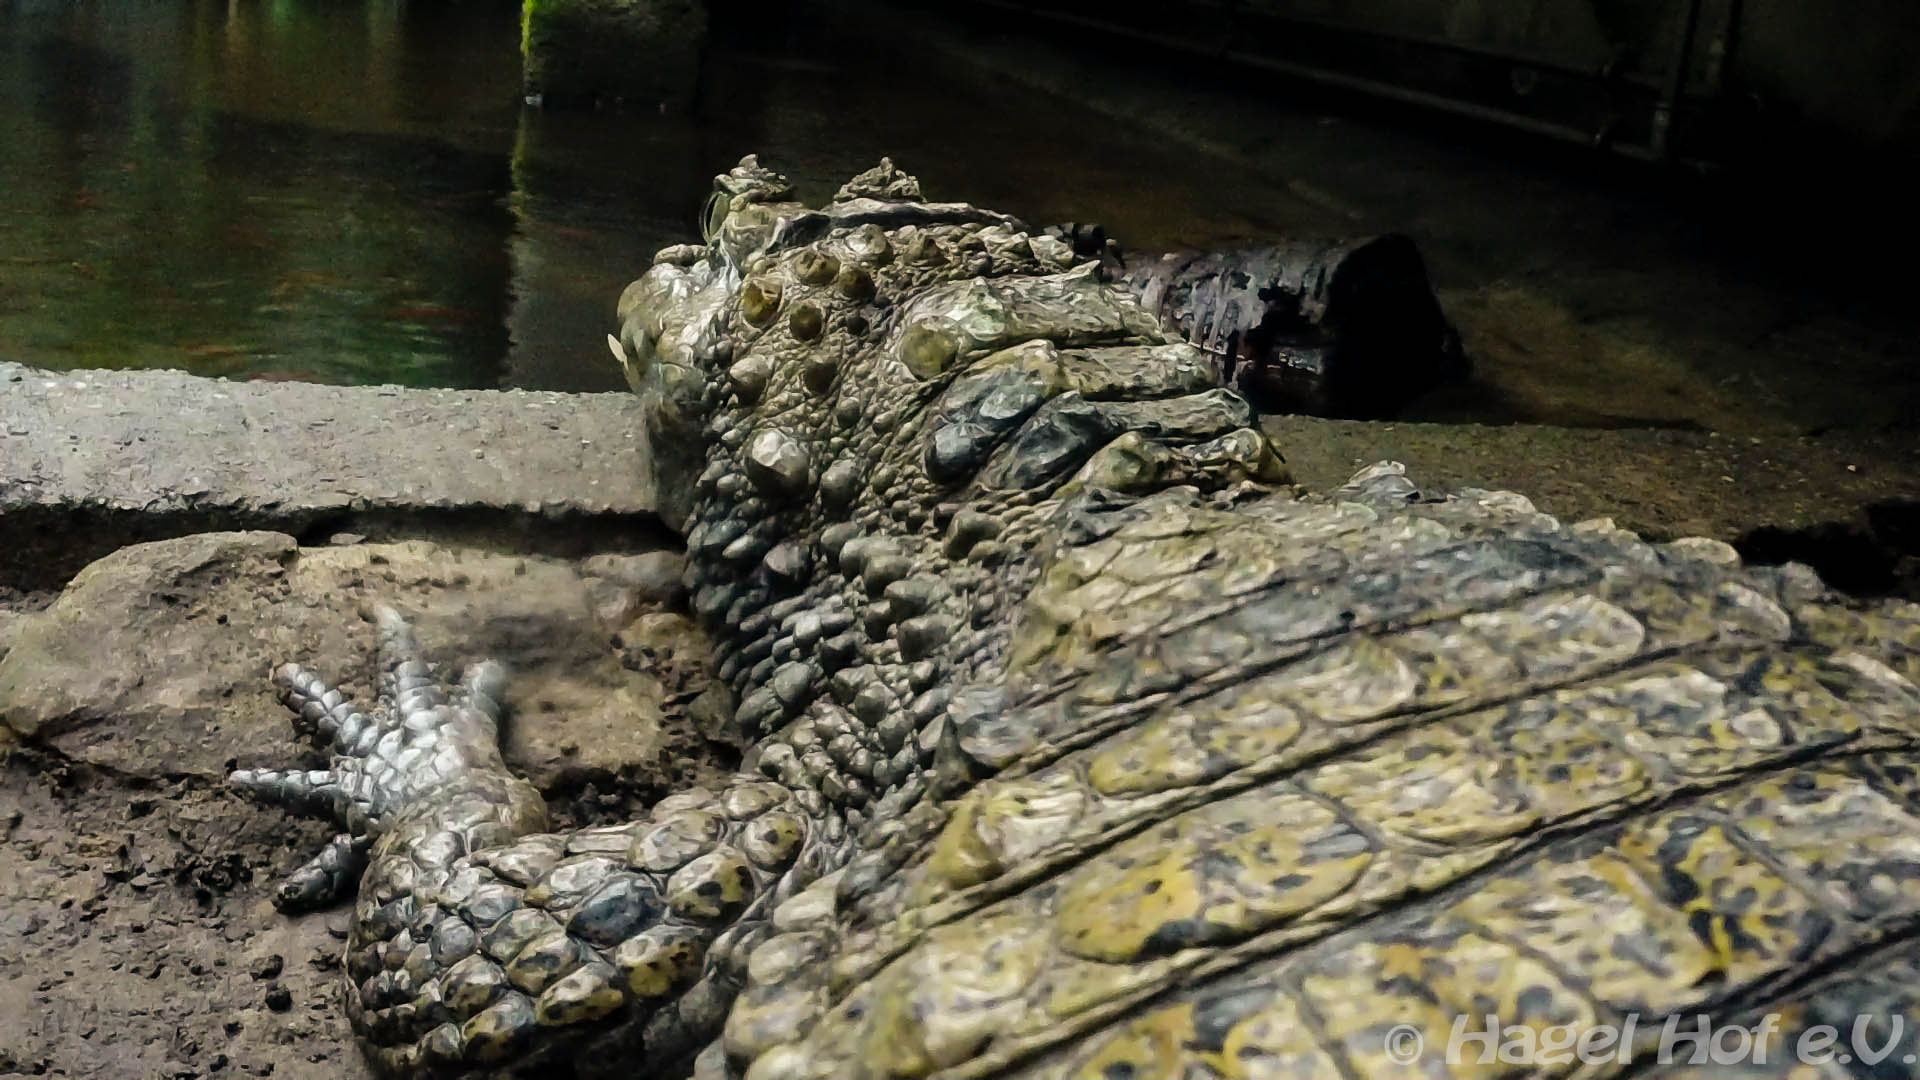 large alligator resting on concrete next to small river